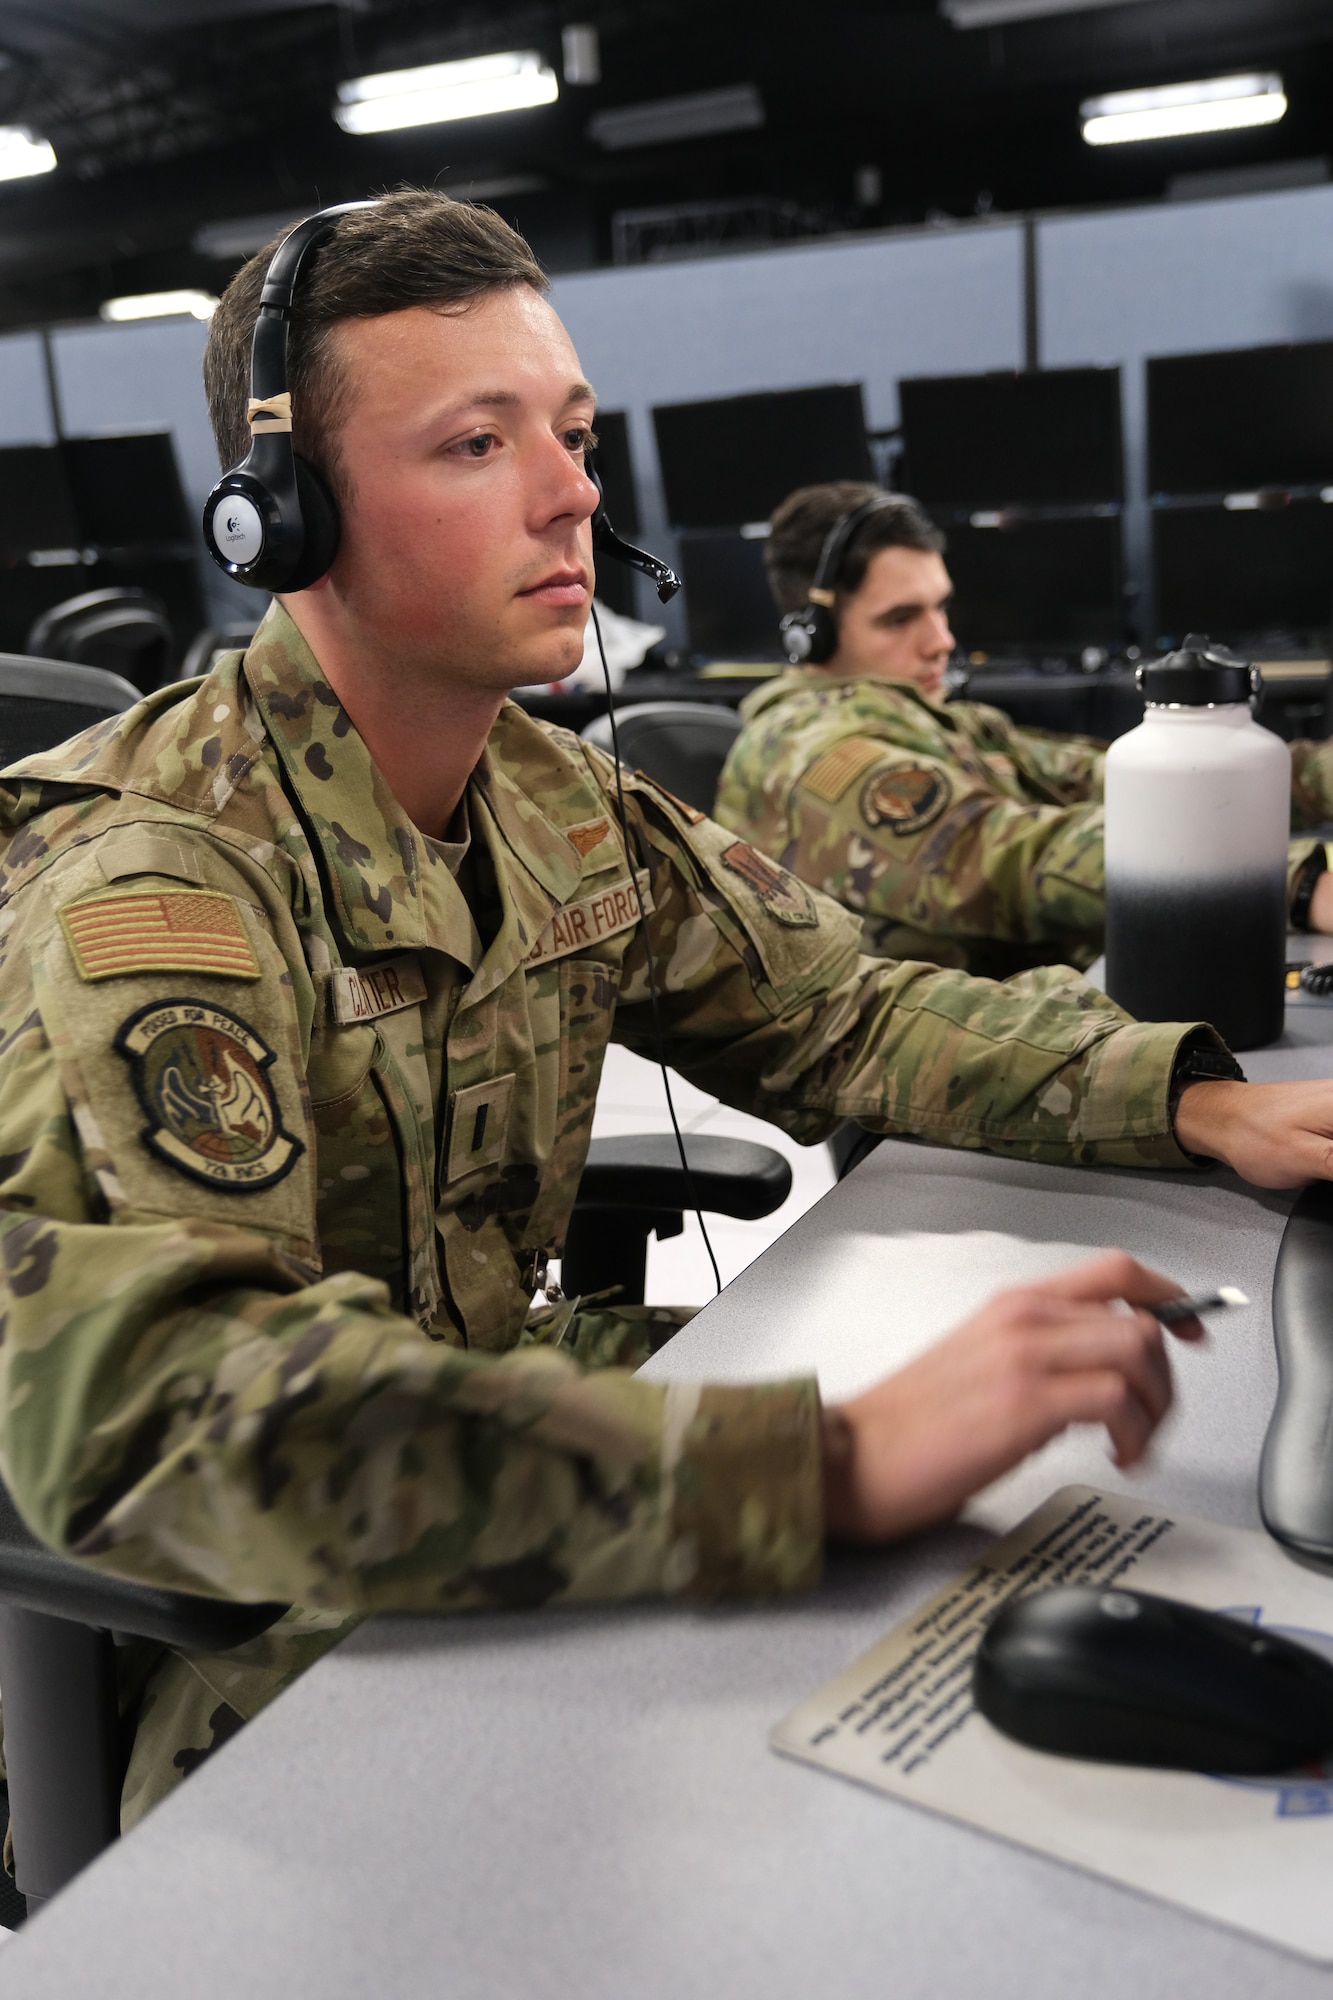 two uniformed U.S. Air Force Airmen wearing headsets, work at computers, in the background are multiple computer screens